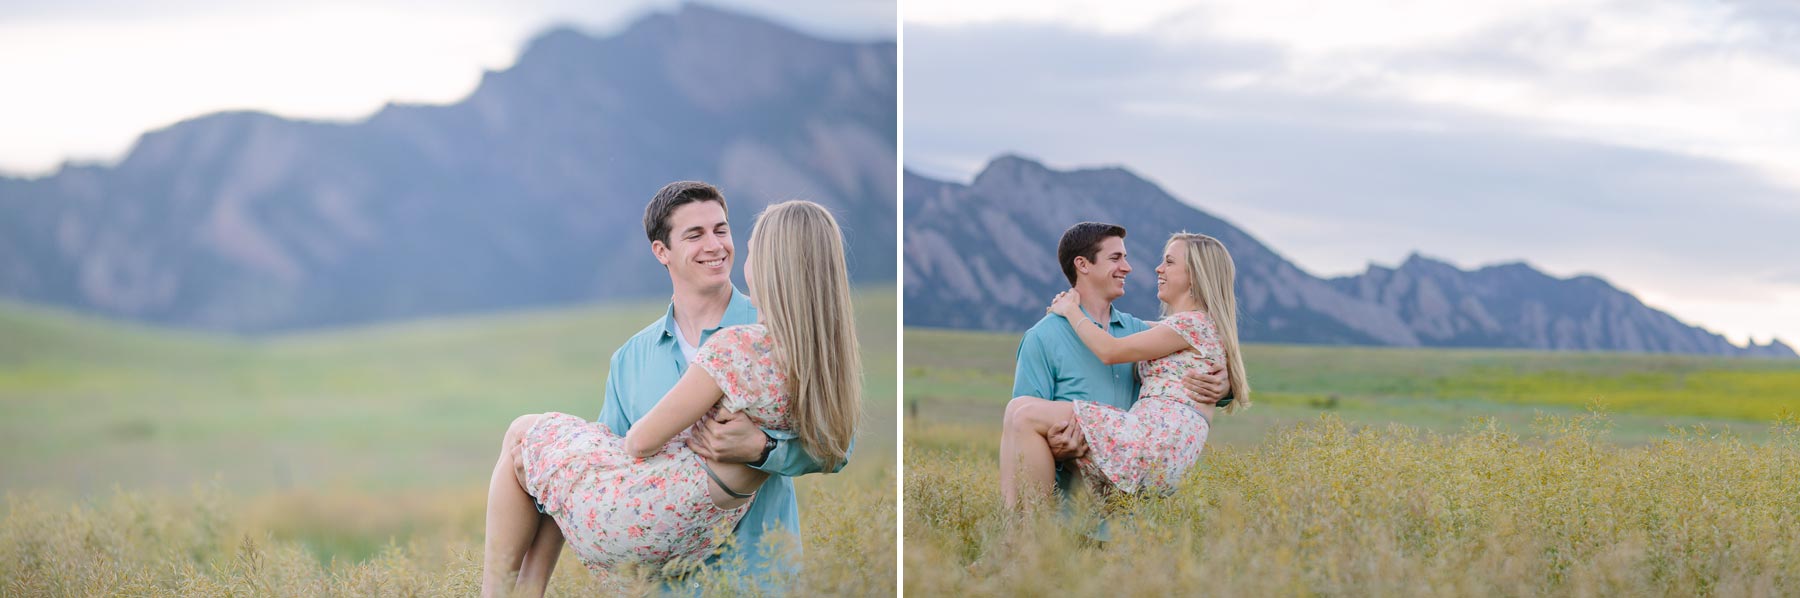 Irivng-Photography-Kerstyn-Korby-Colorado-Engagement-Photographers-010